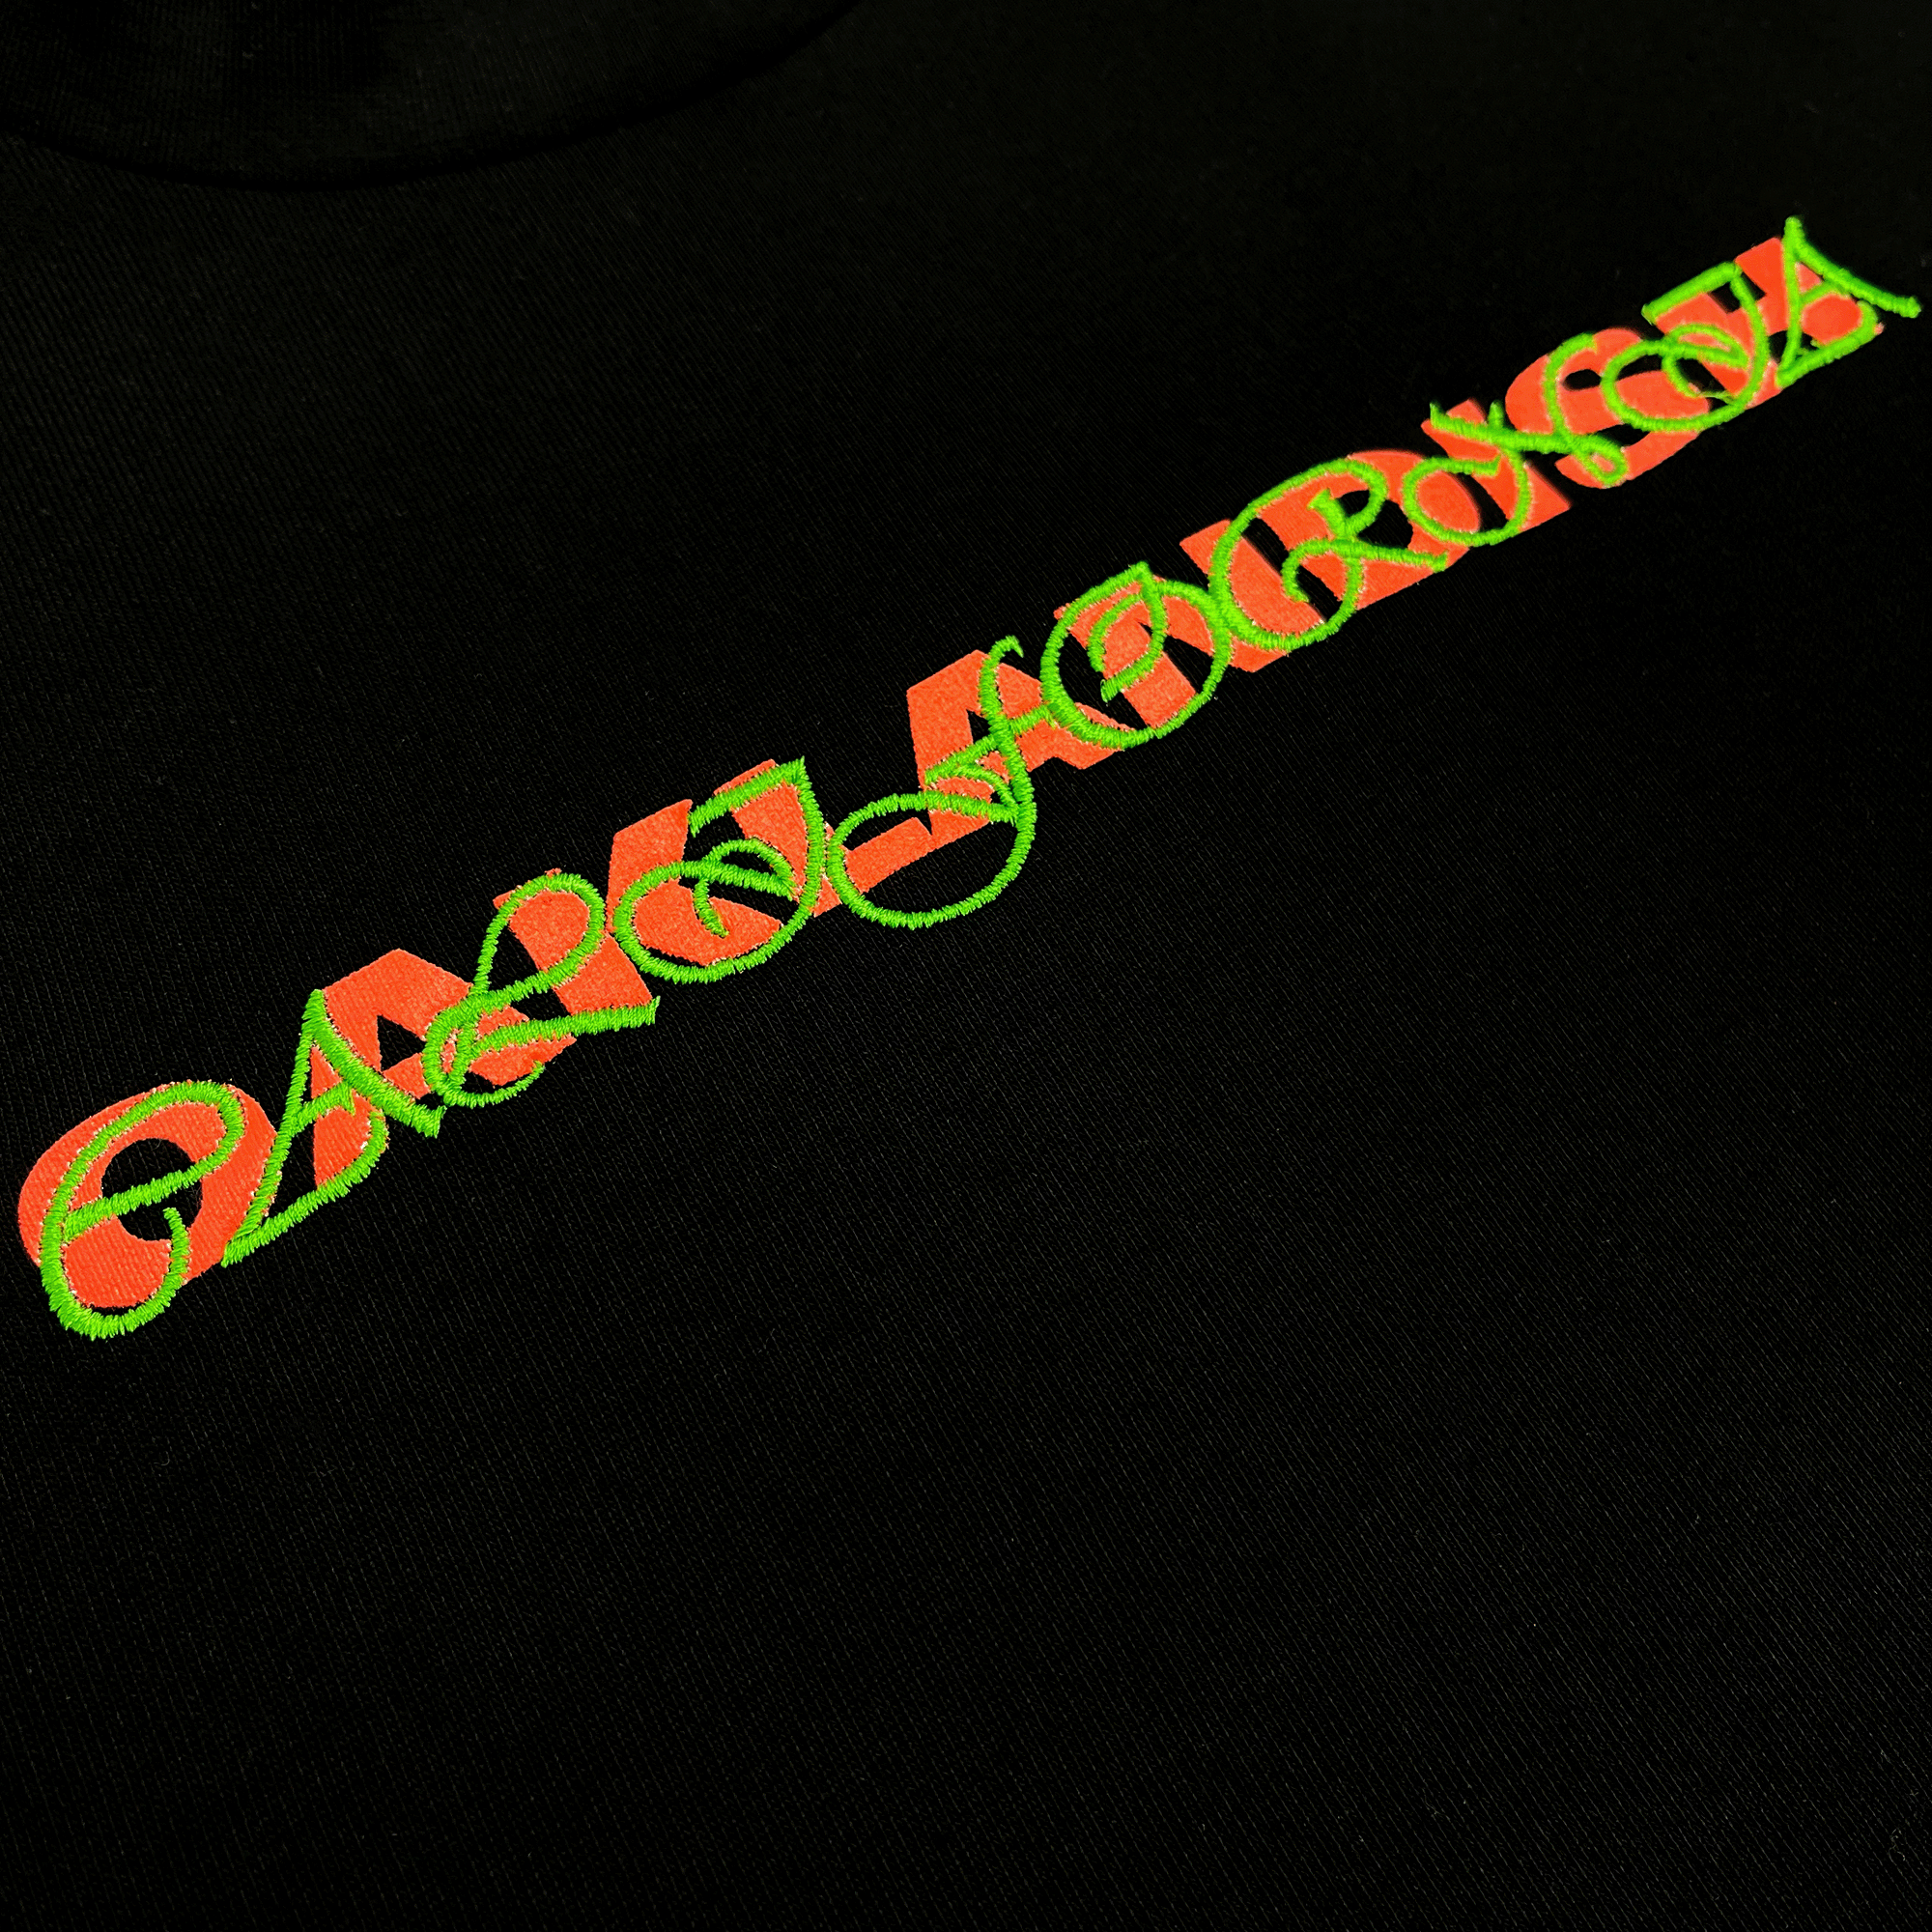 Detailed close-up on Oaklandish wordmark with green scripted Oaklandish wordmark on top on a black t-shirt.